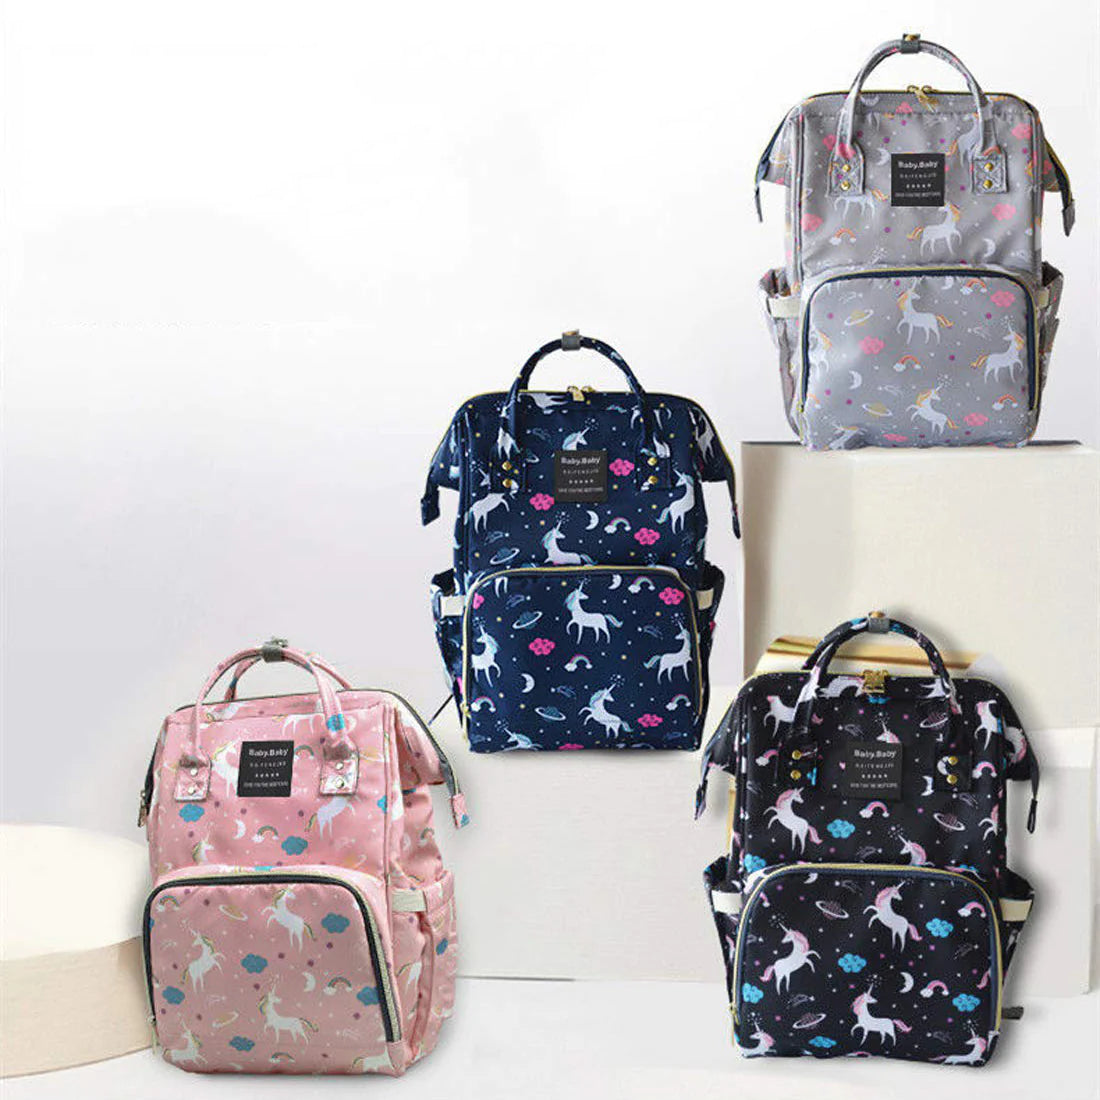 House of Quirk Diaper Backpacks